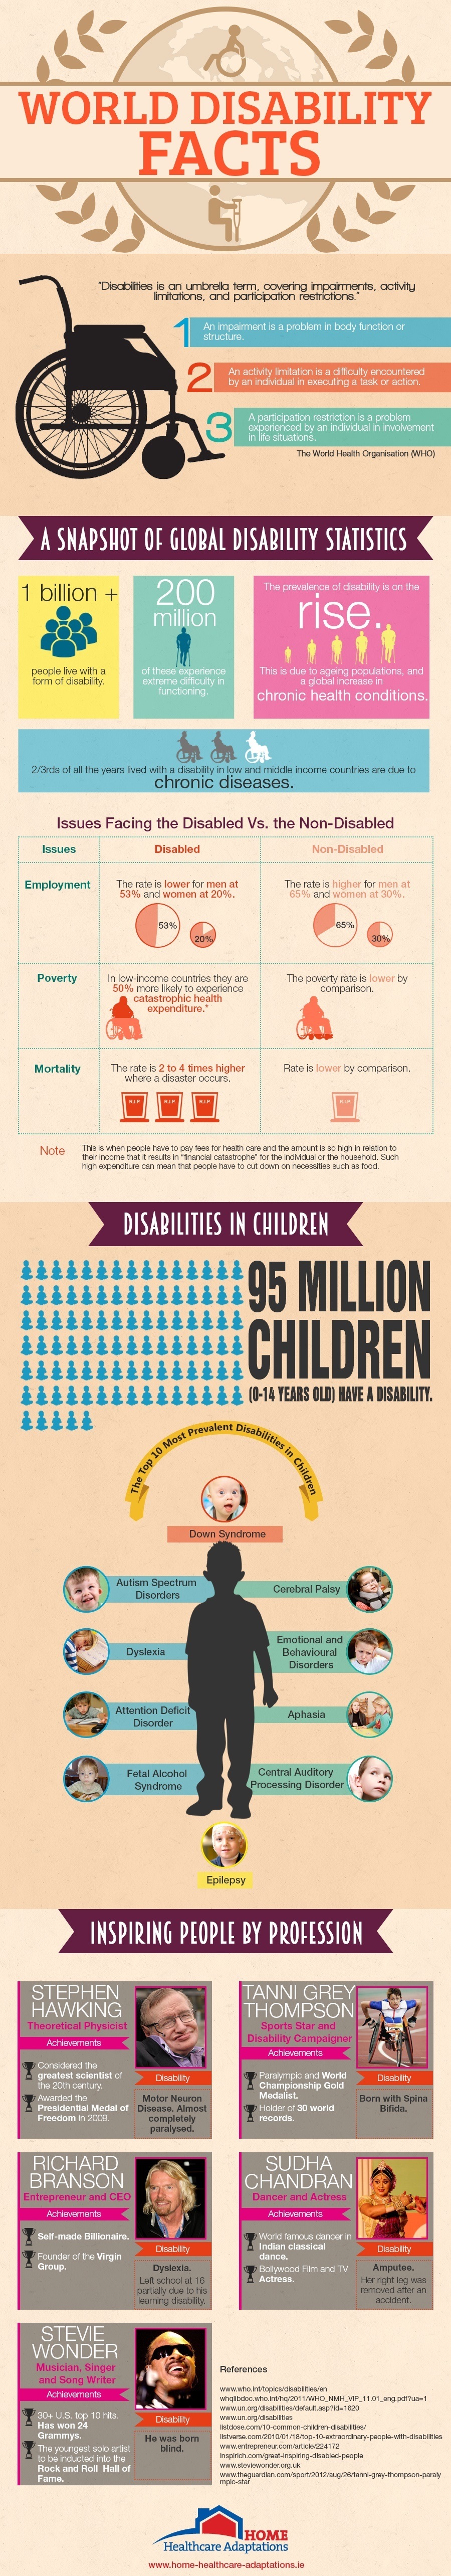 World Disability Facts Infographic